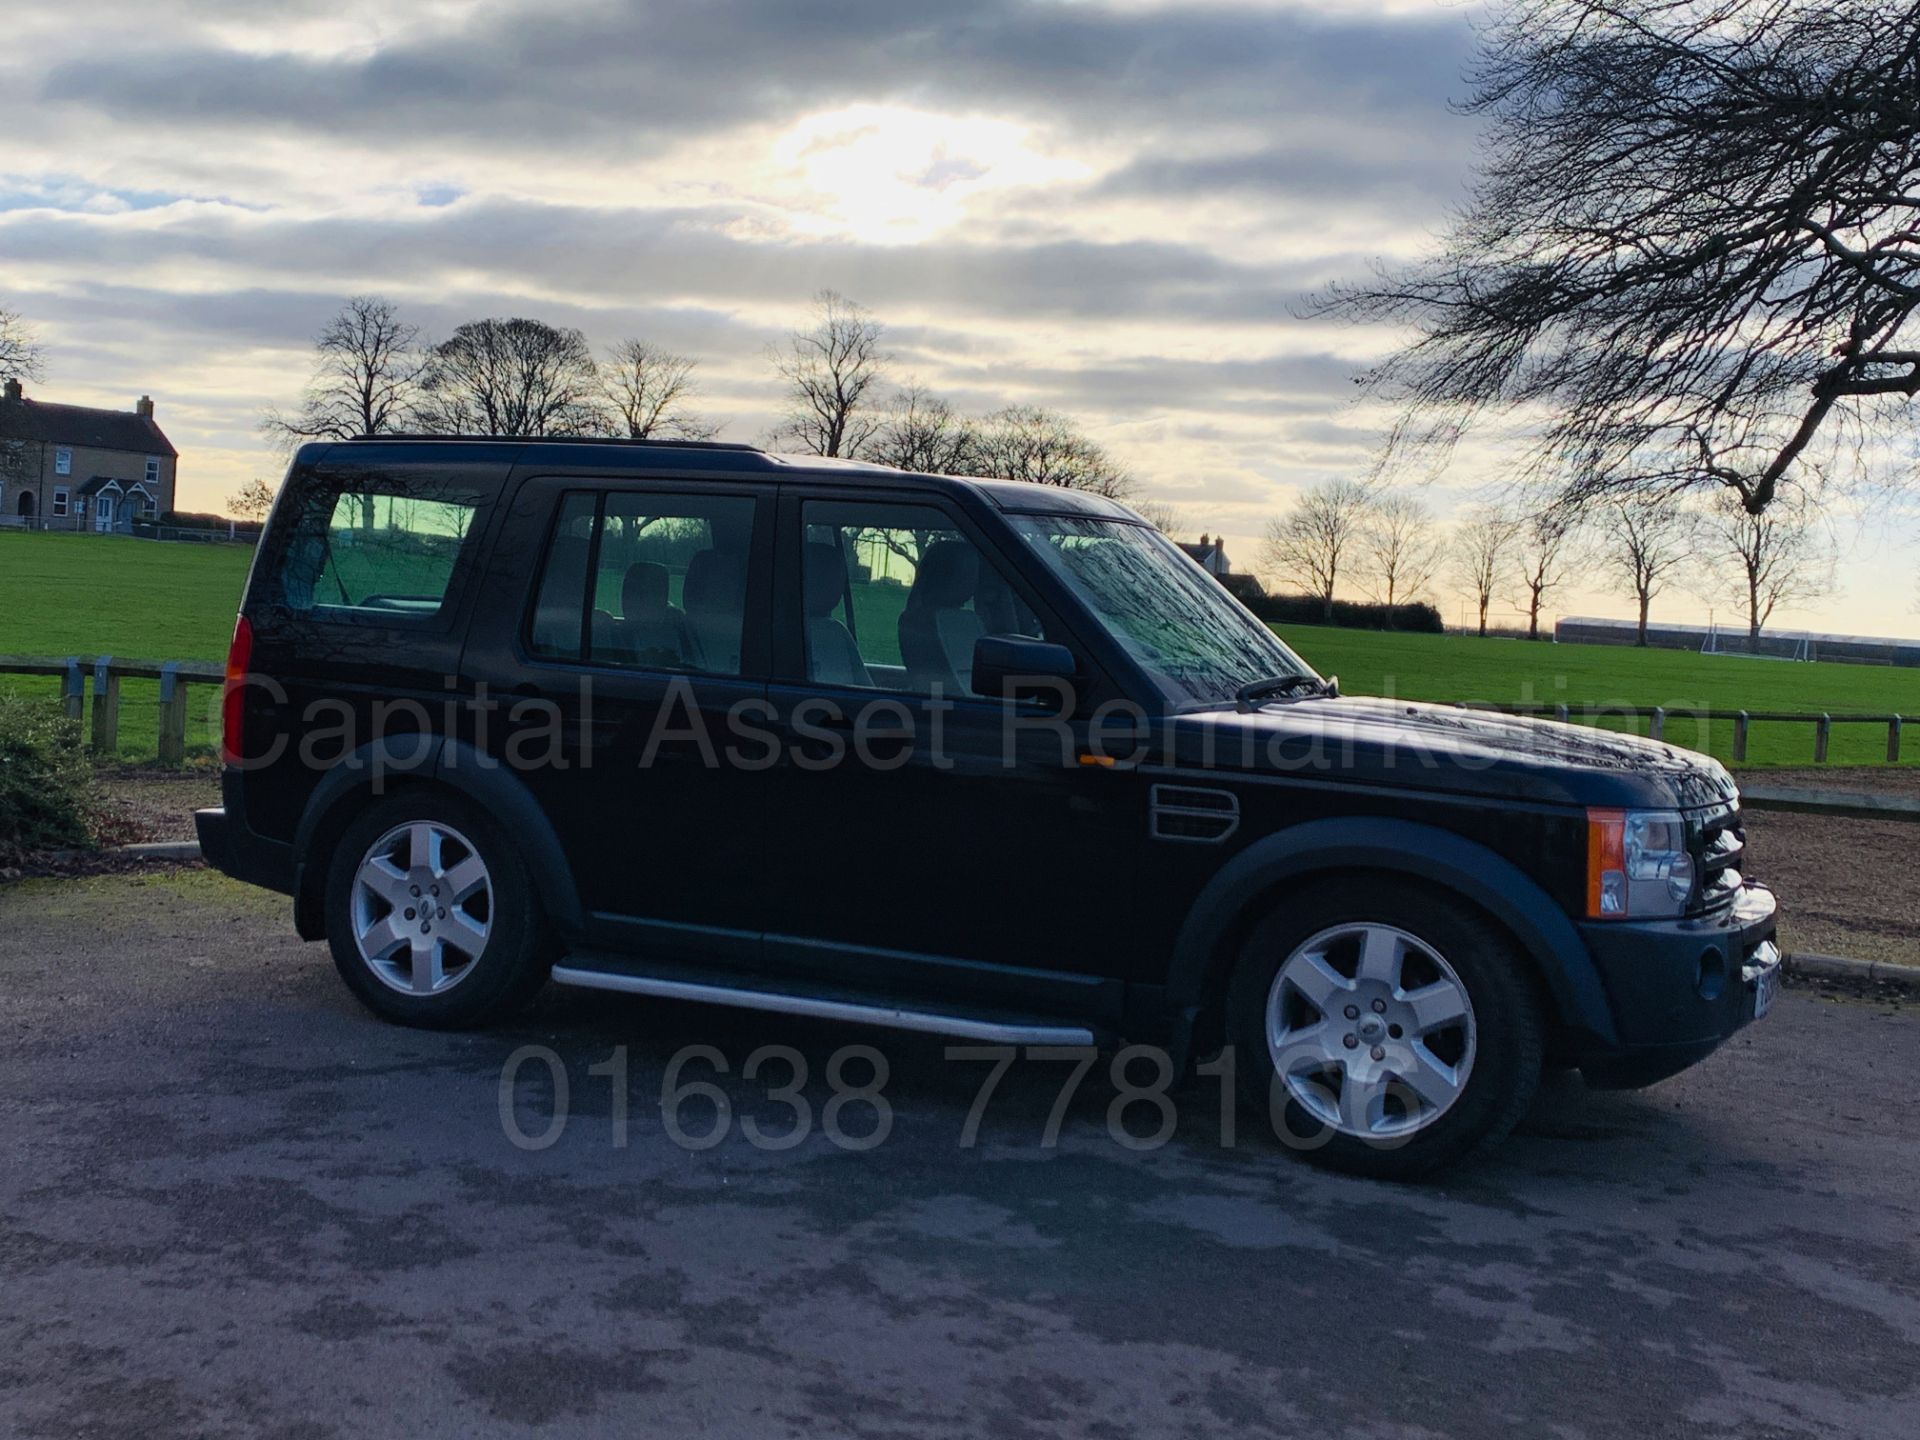 (ON SALE) LAND ROVER DISCOVERY3 *HSE EDITION* (2007) 'TDV6 - AUTO' *7 SEATER - LEATHER - SAT NAV* - Image 13 of 46